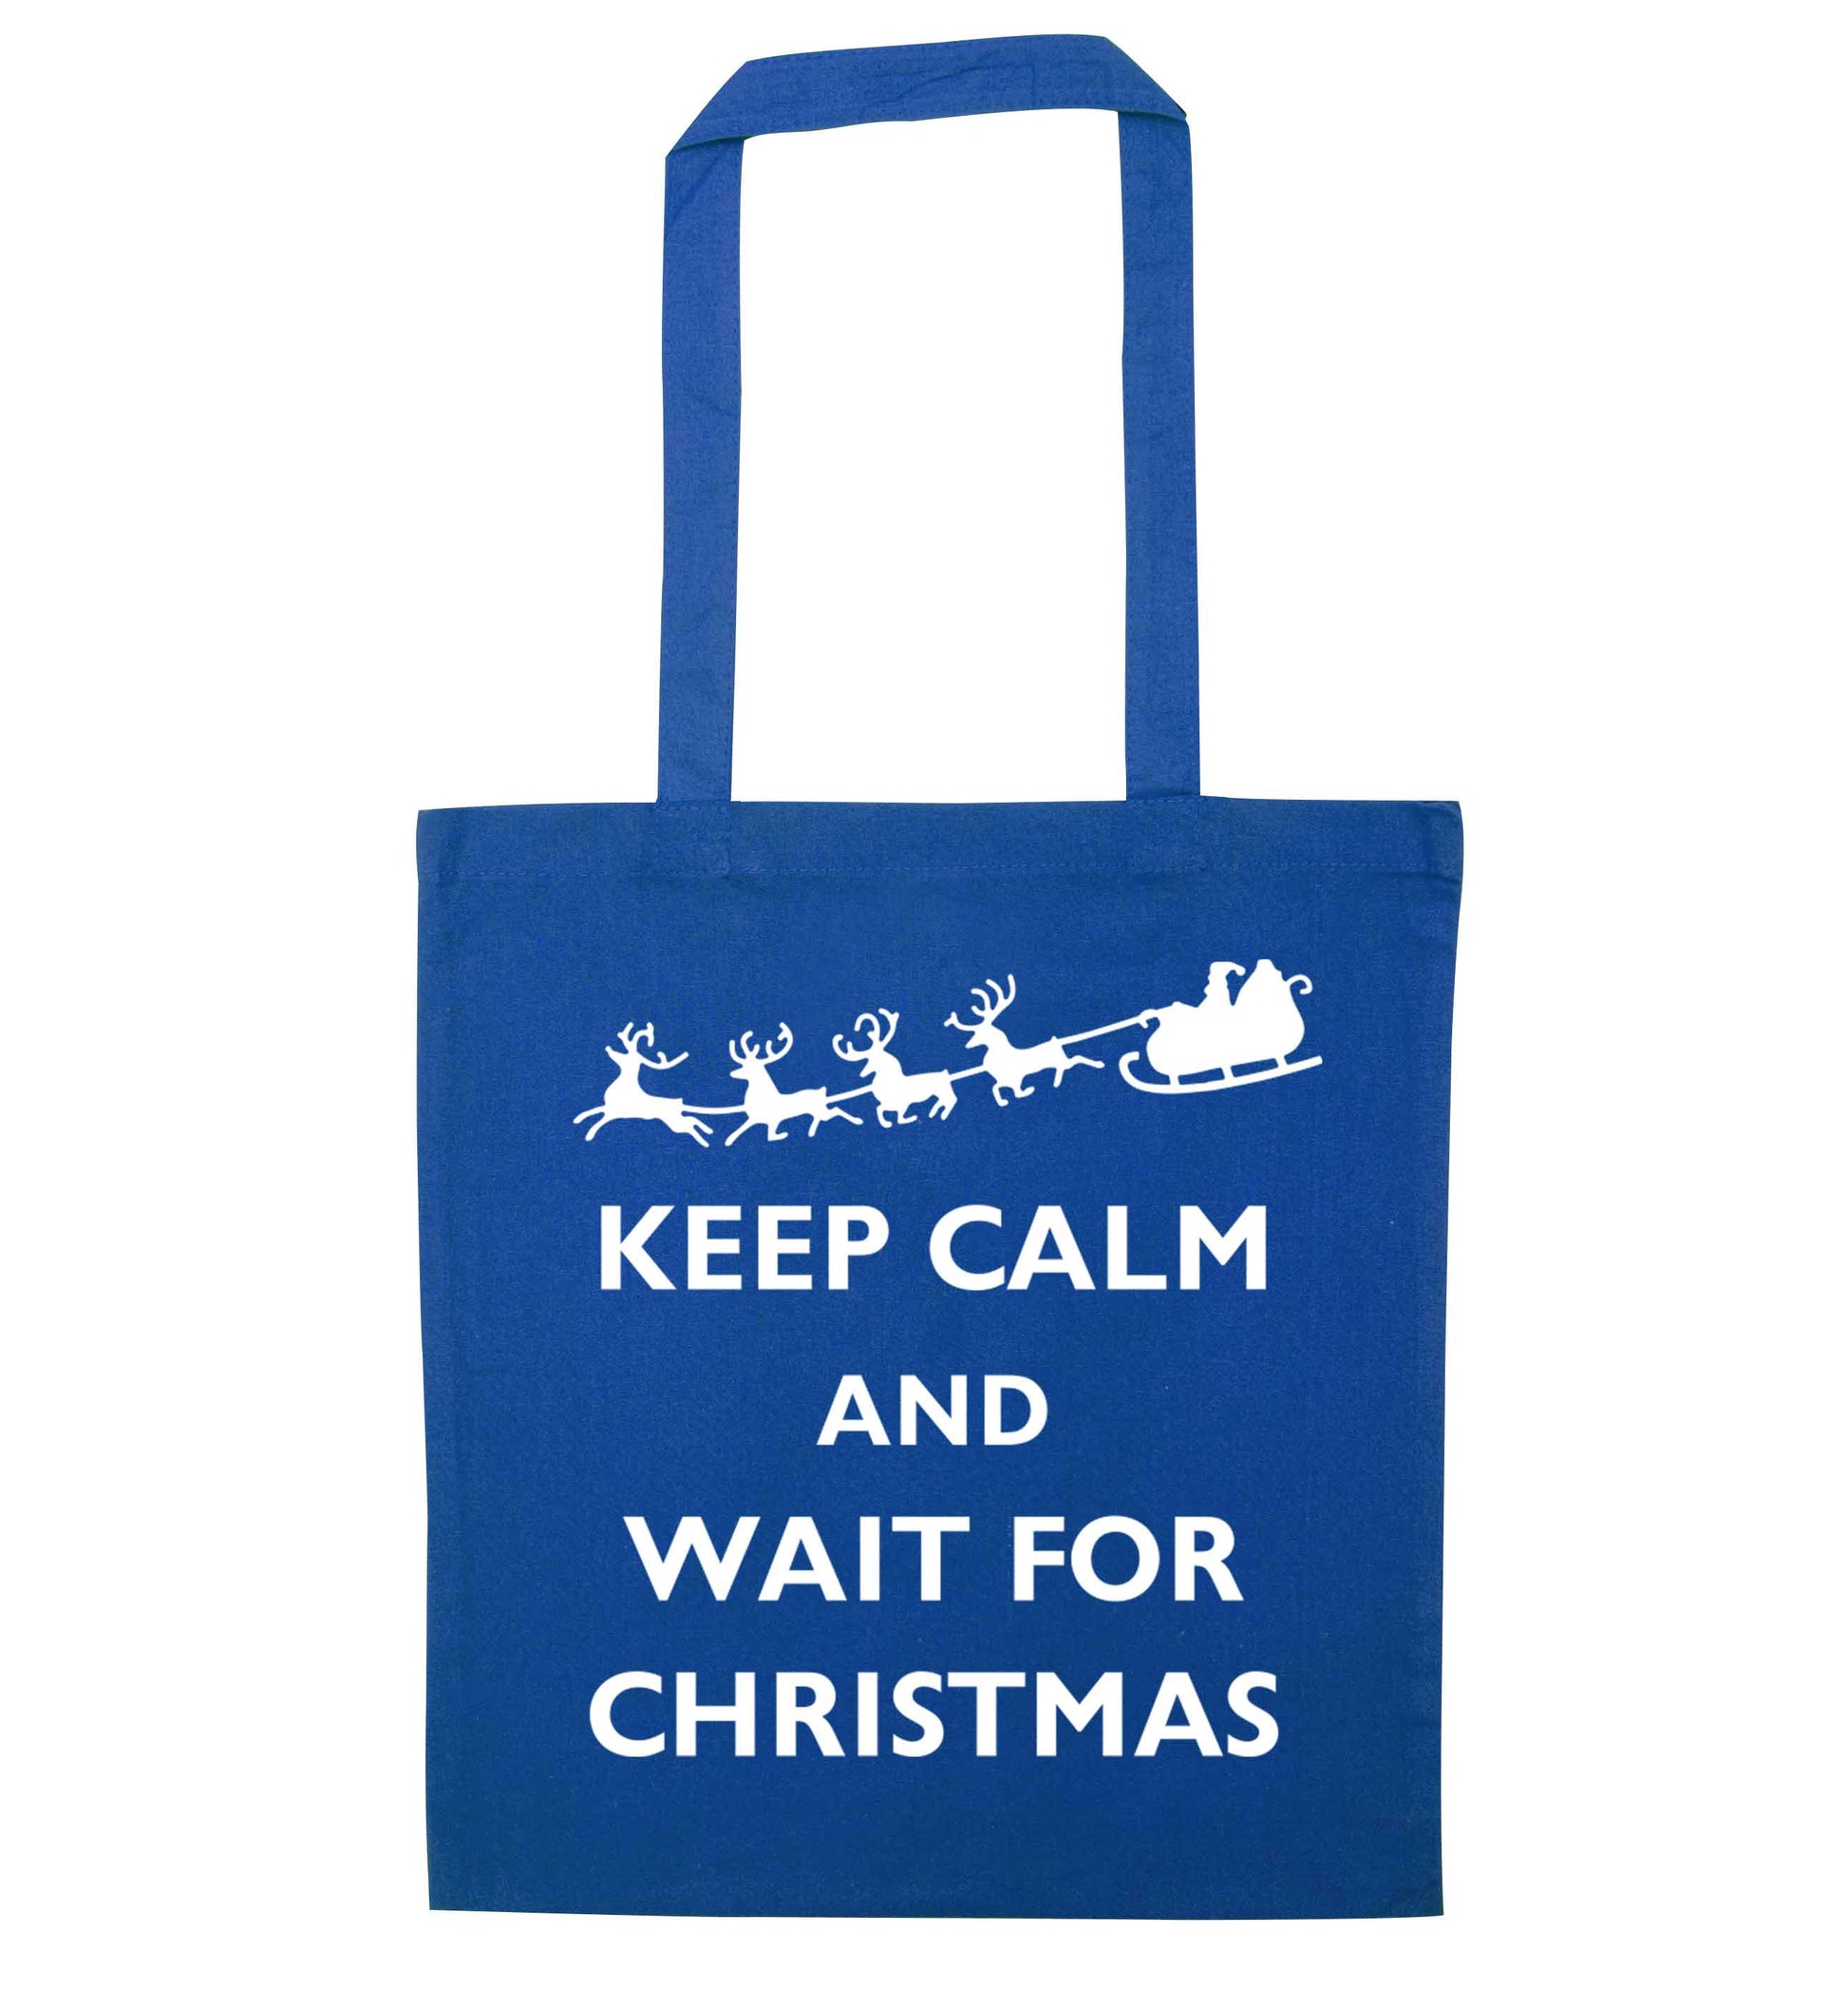 Keep calm and wait for Christmas blue tote bag